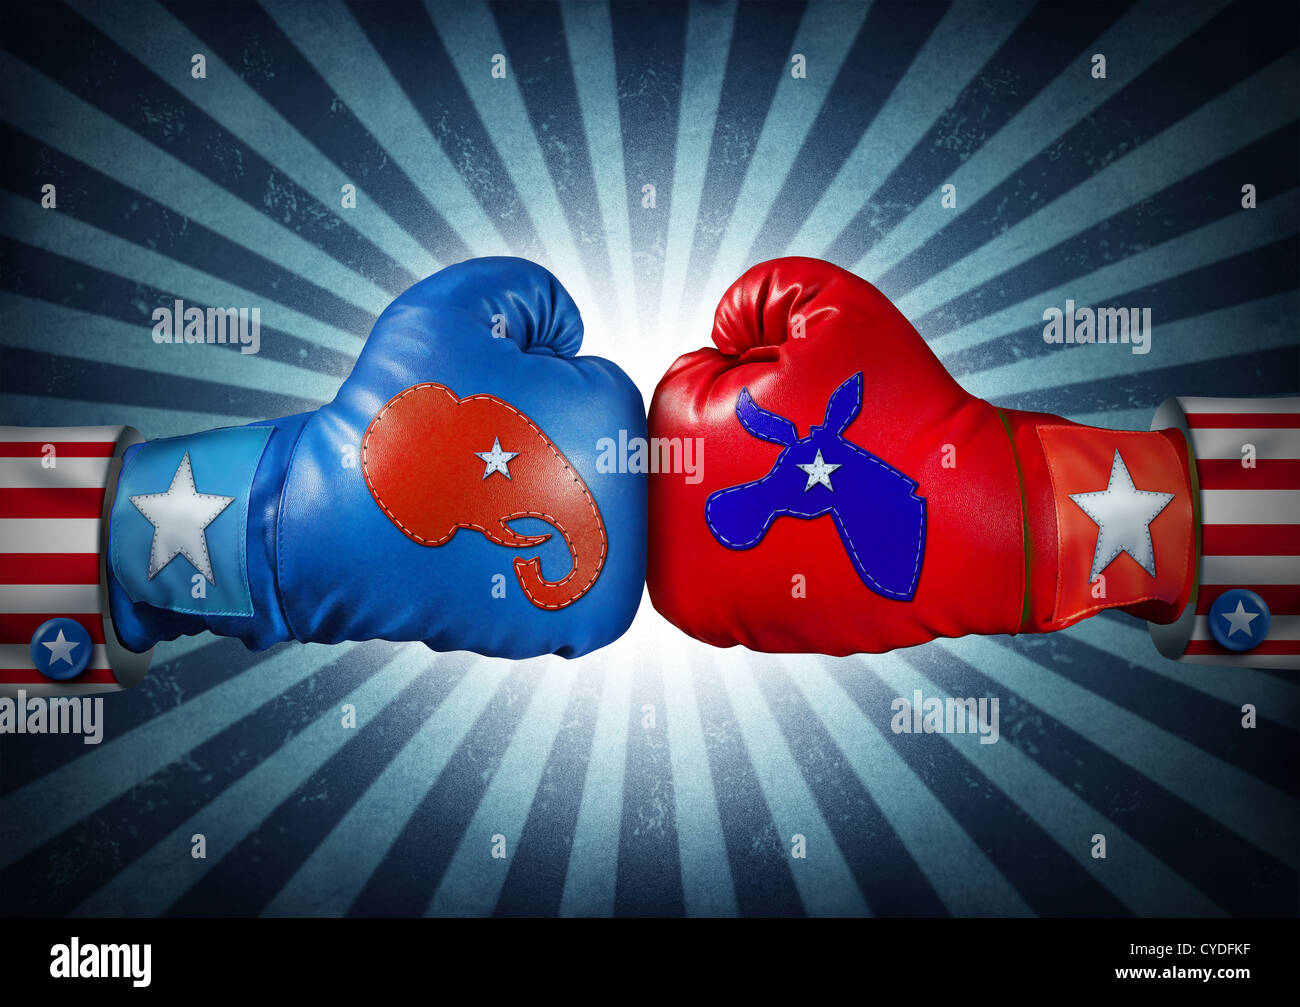 American election campaign fight as Republican versus Democrat as two boxing gloves with the elephant and donkey symbol stitched fighting for the vote of the United states presidential and government seat. Stock Photo